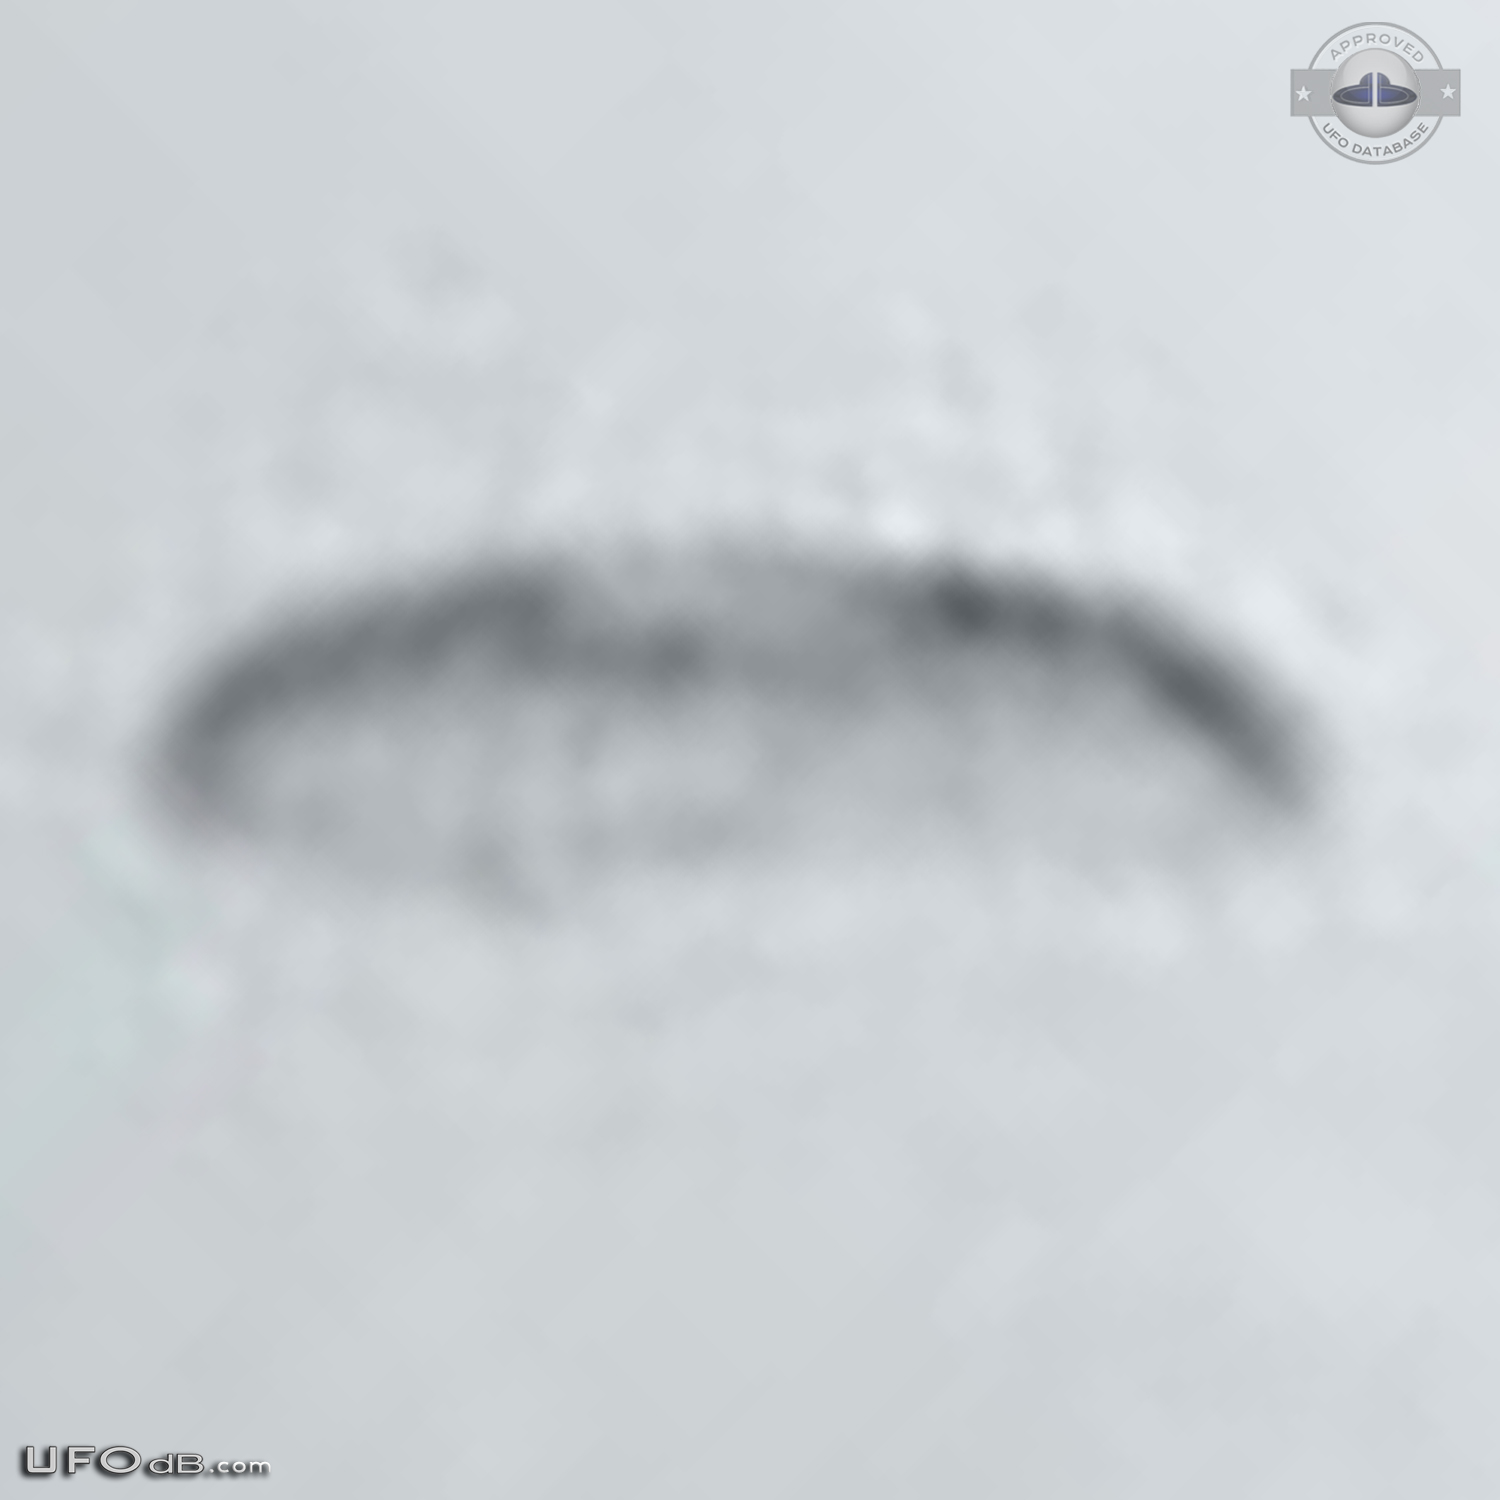 Parachute shaped UFO seen over Claromeco, Tres Arroyos Argentina UFO Picture #620-6